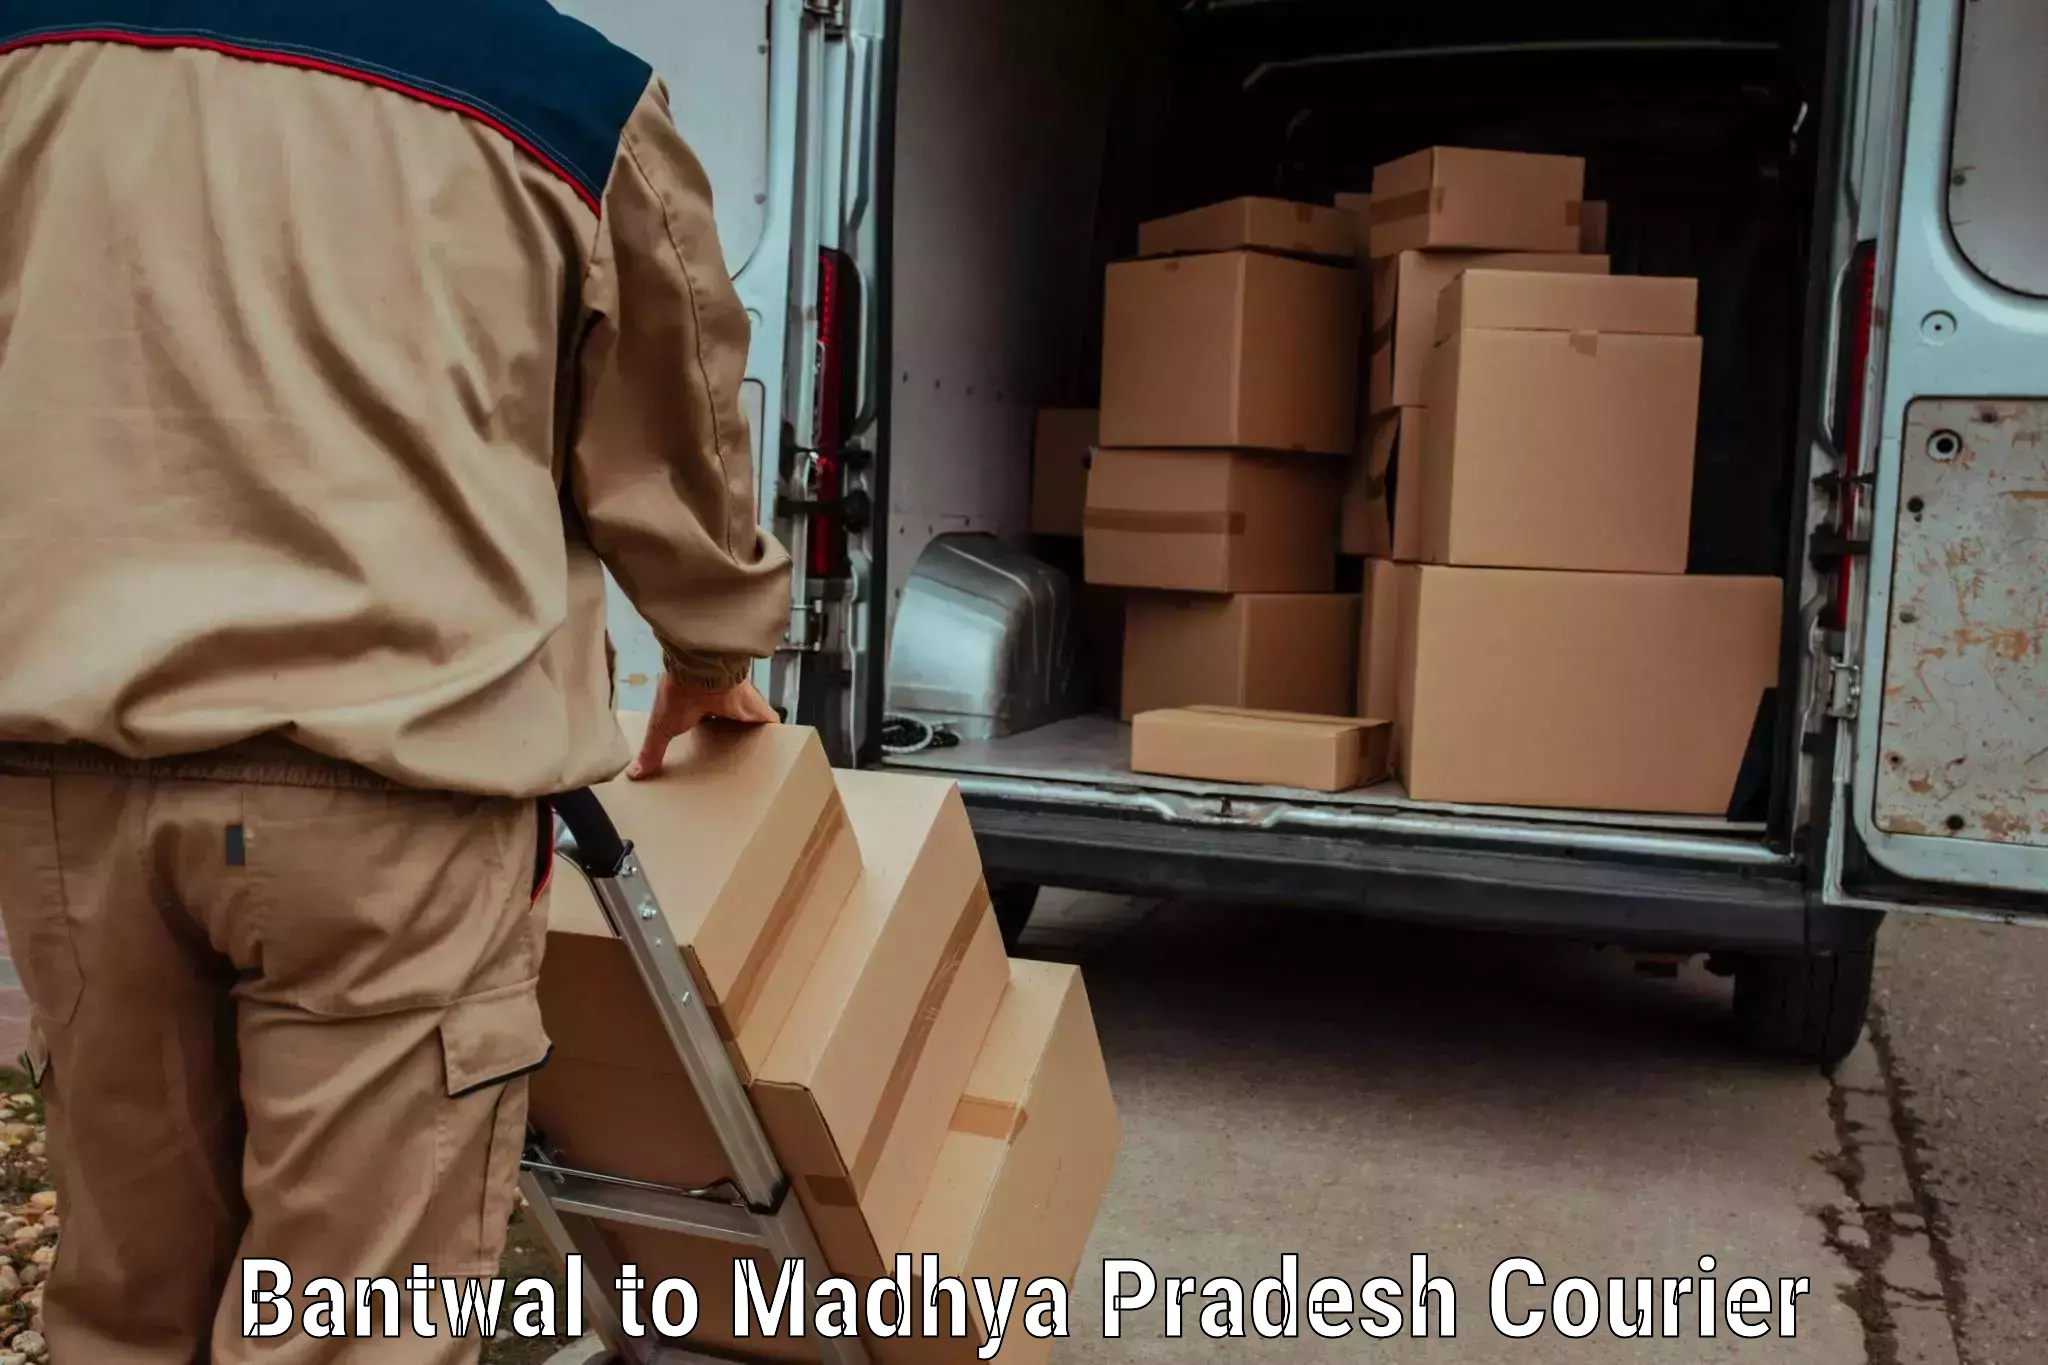 Affordable parcel service Bantwal to Bhopal